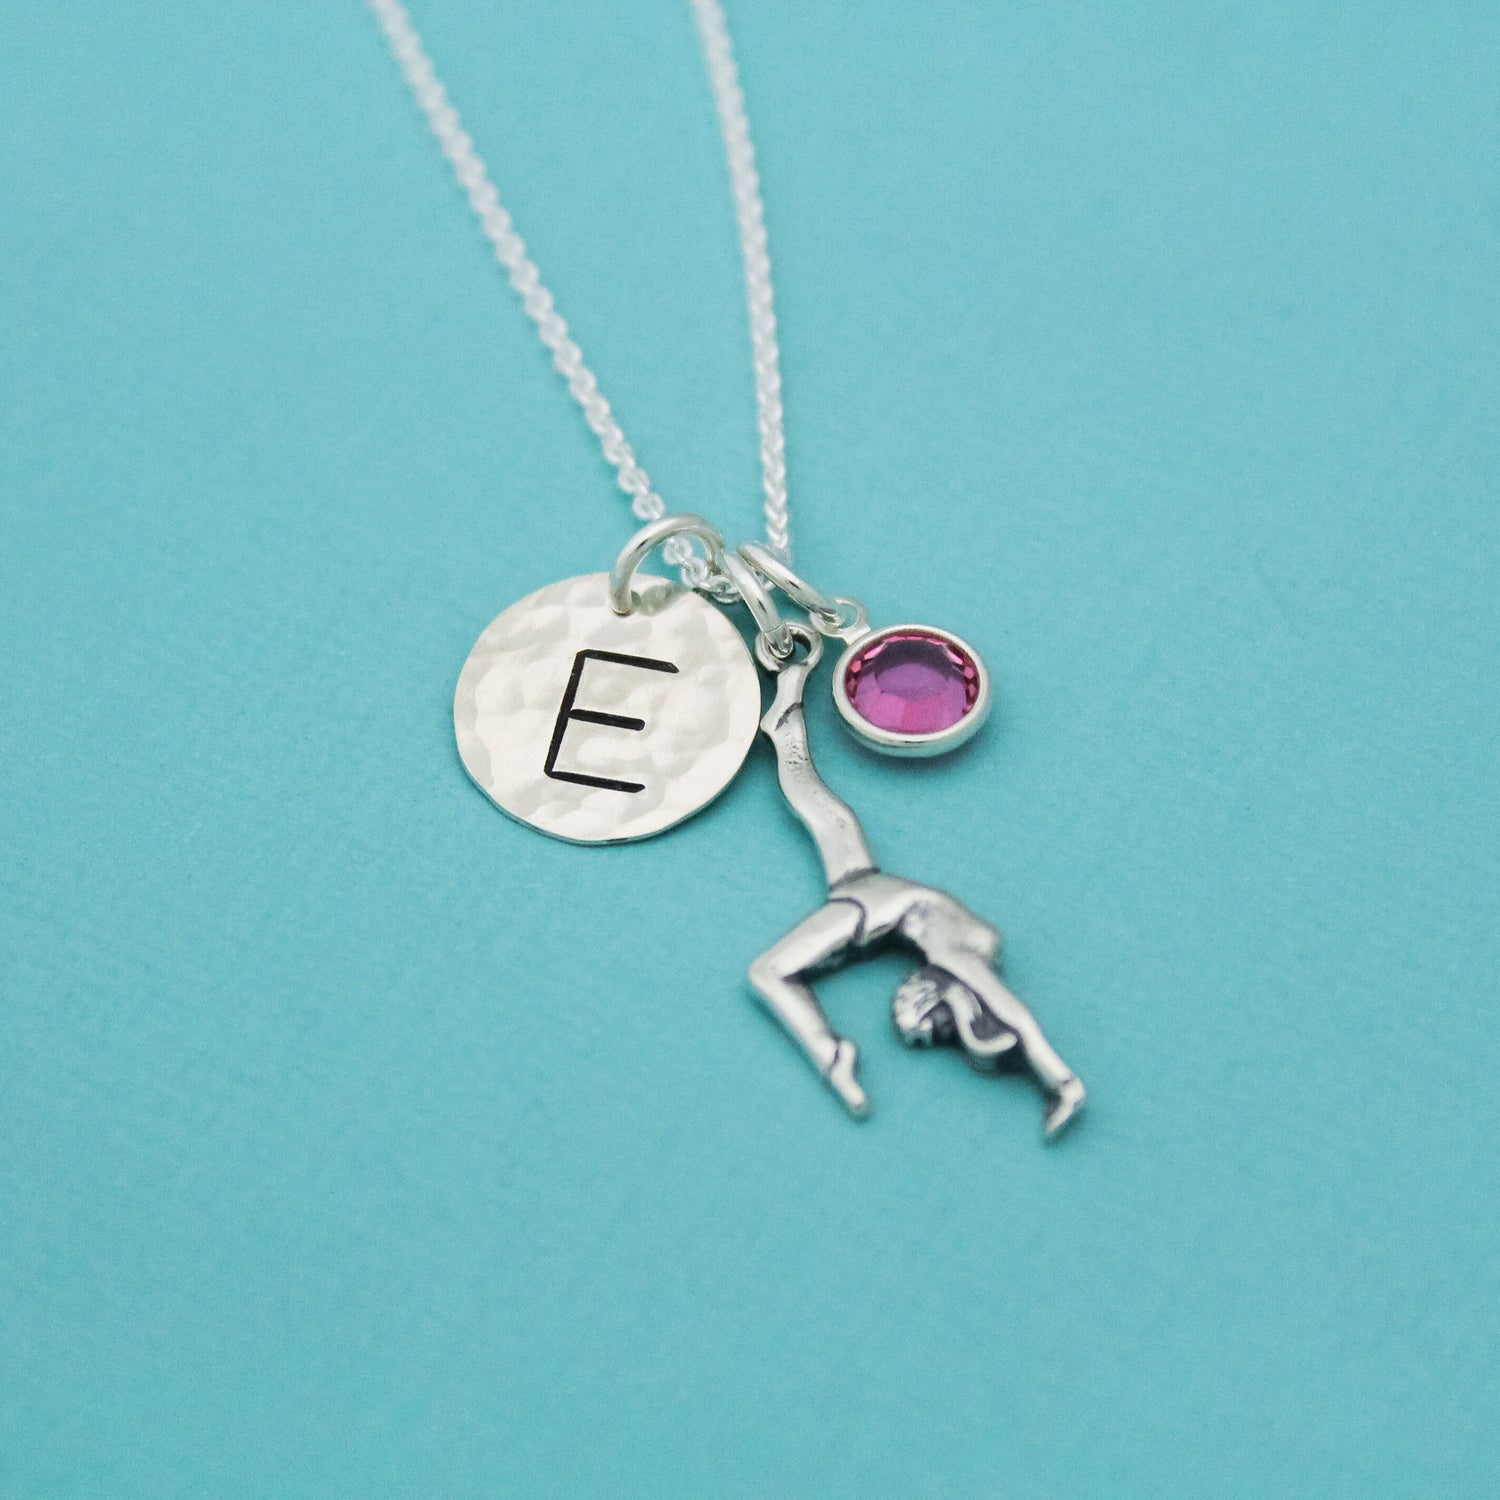 Gymnast Charm Necklace Sterling Silver with Birthstone and Initial Personalized Hand Stamped Necklace-